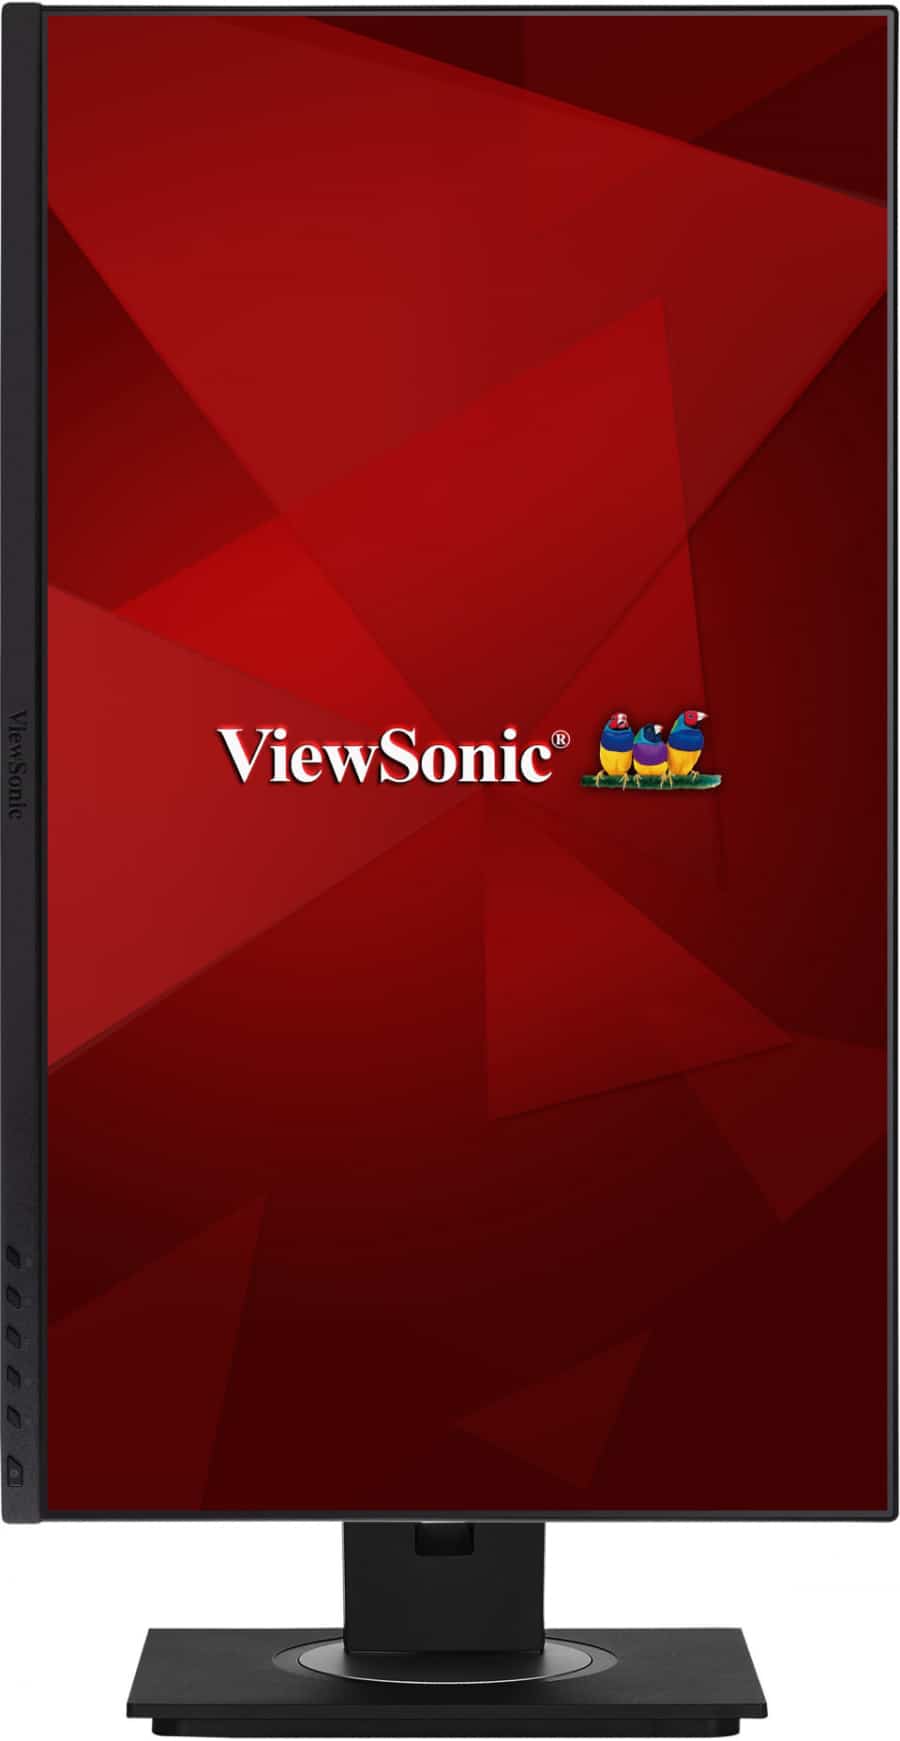 Viewsonic VG2756-4K Front Vertical View